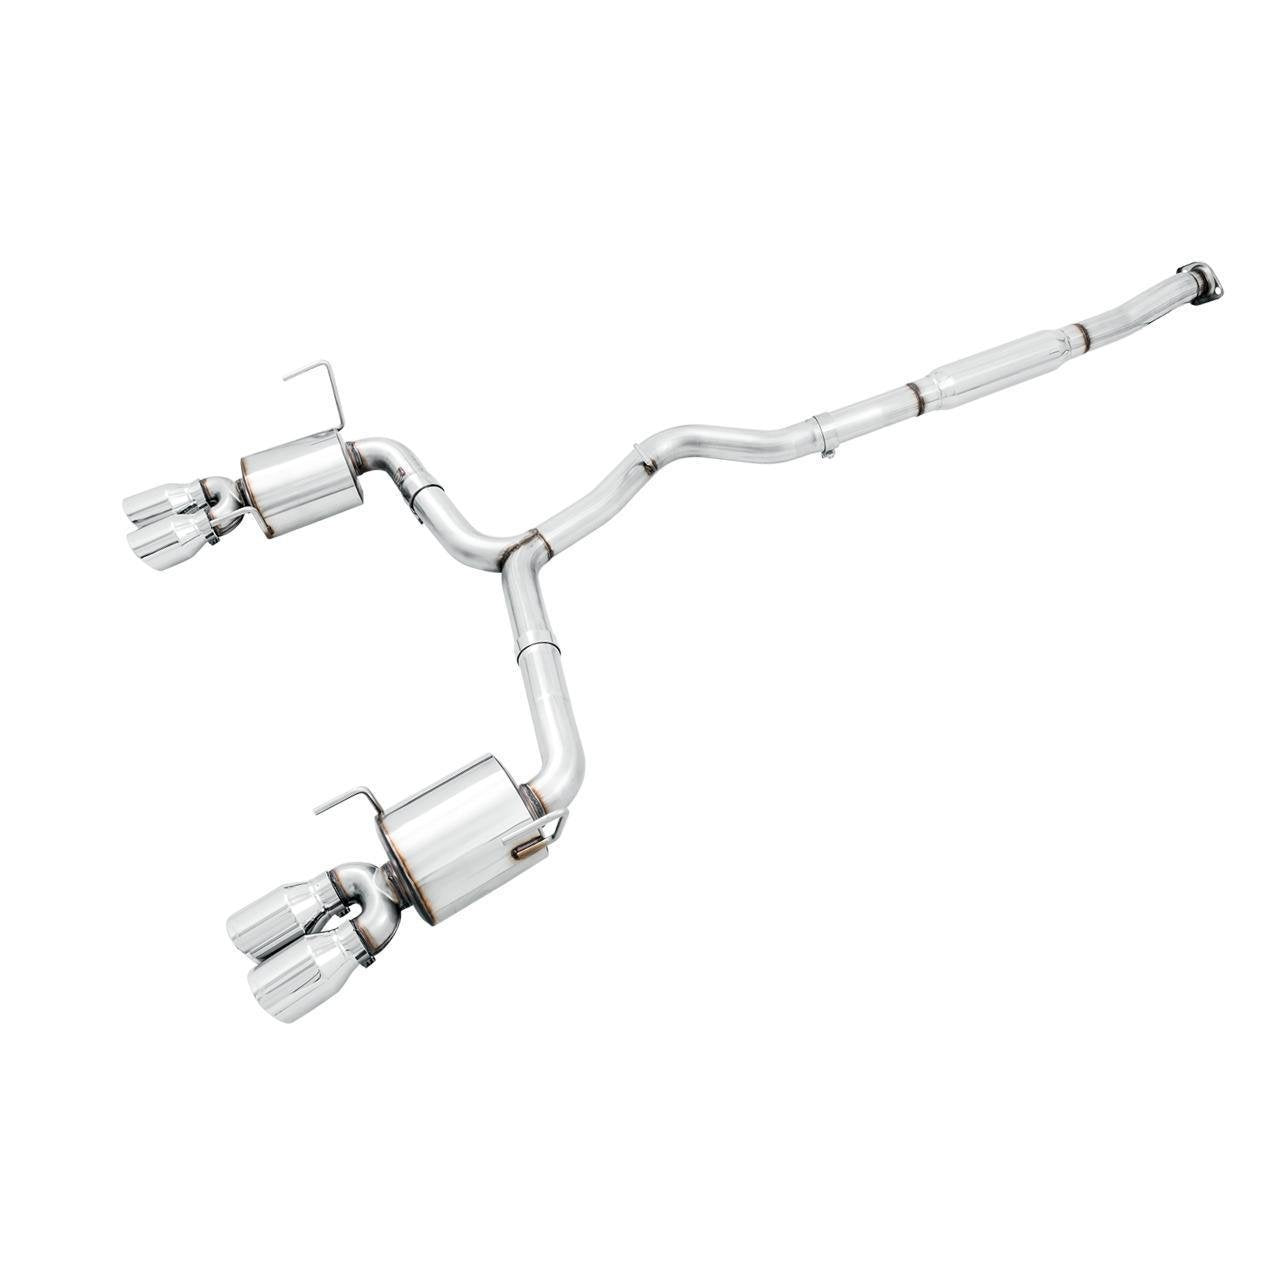 AWE Touring Edition Cat Back Exhaust Chrome Silver Quad Tips (102mm) Subaru WRX 2015-2019 (3015-42098)-awe3015-42098-3015-42098-Cat Back Exhaust System-AWE Tuning-JDMuscle